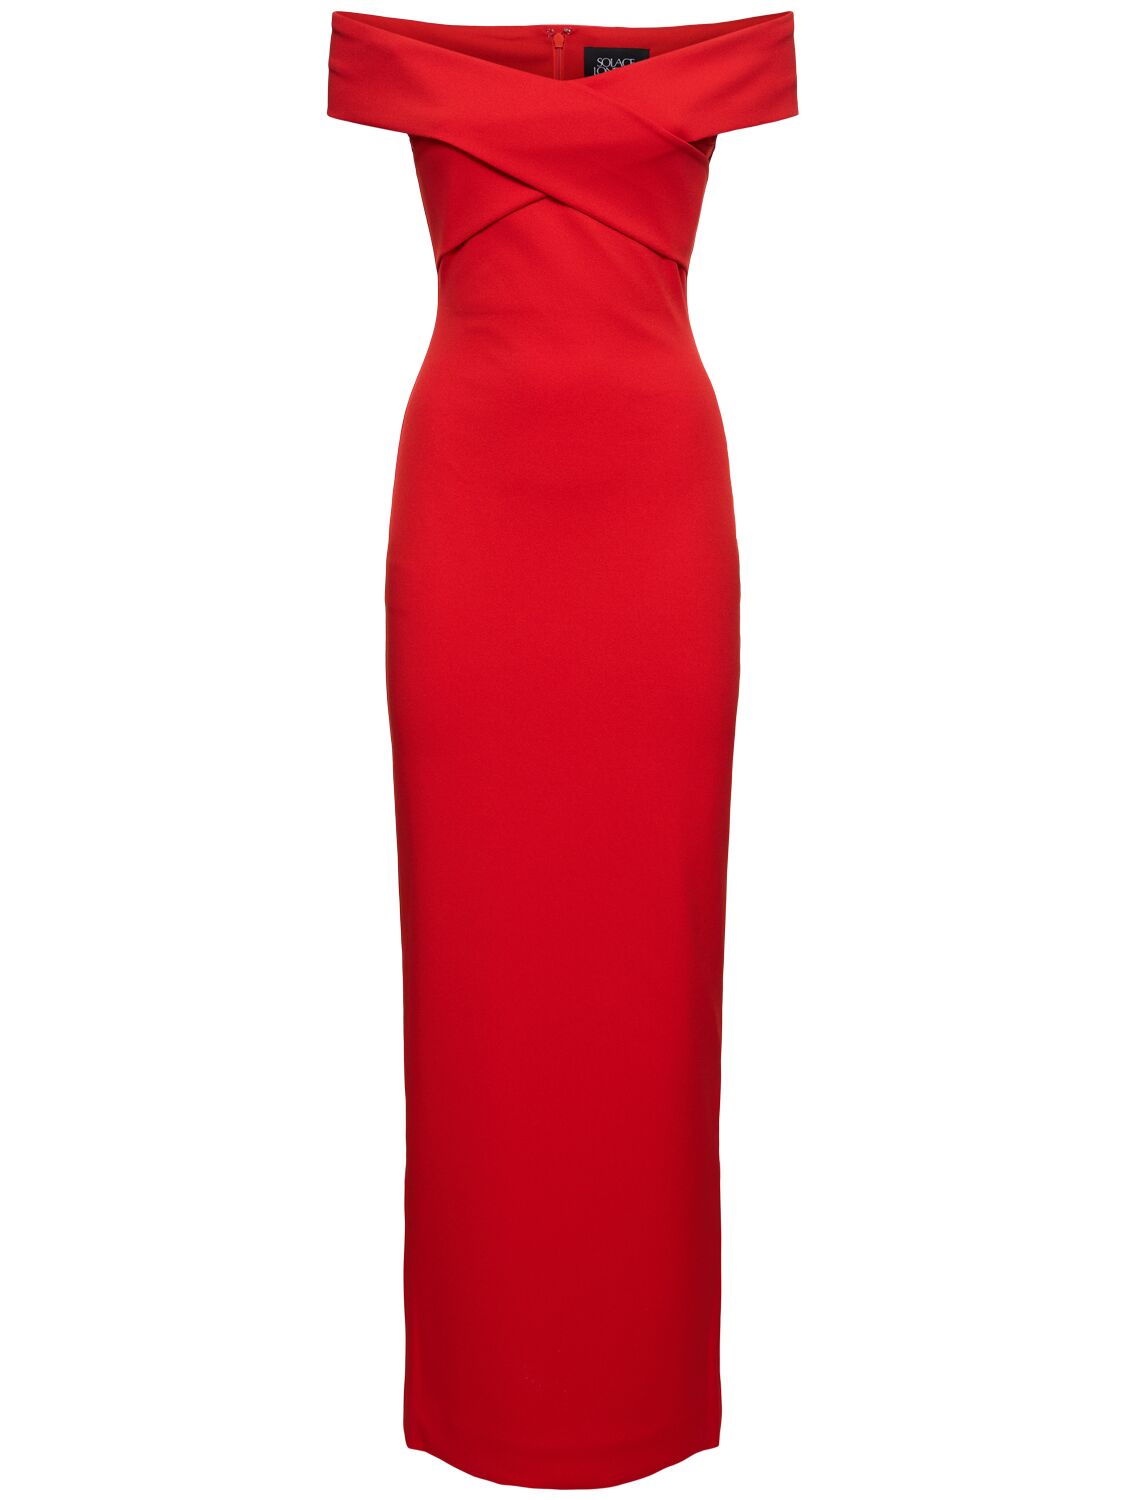 Solace London Inex Crepe Knit Midi Dress In Red